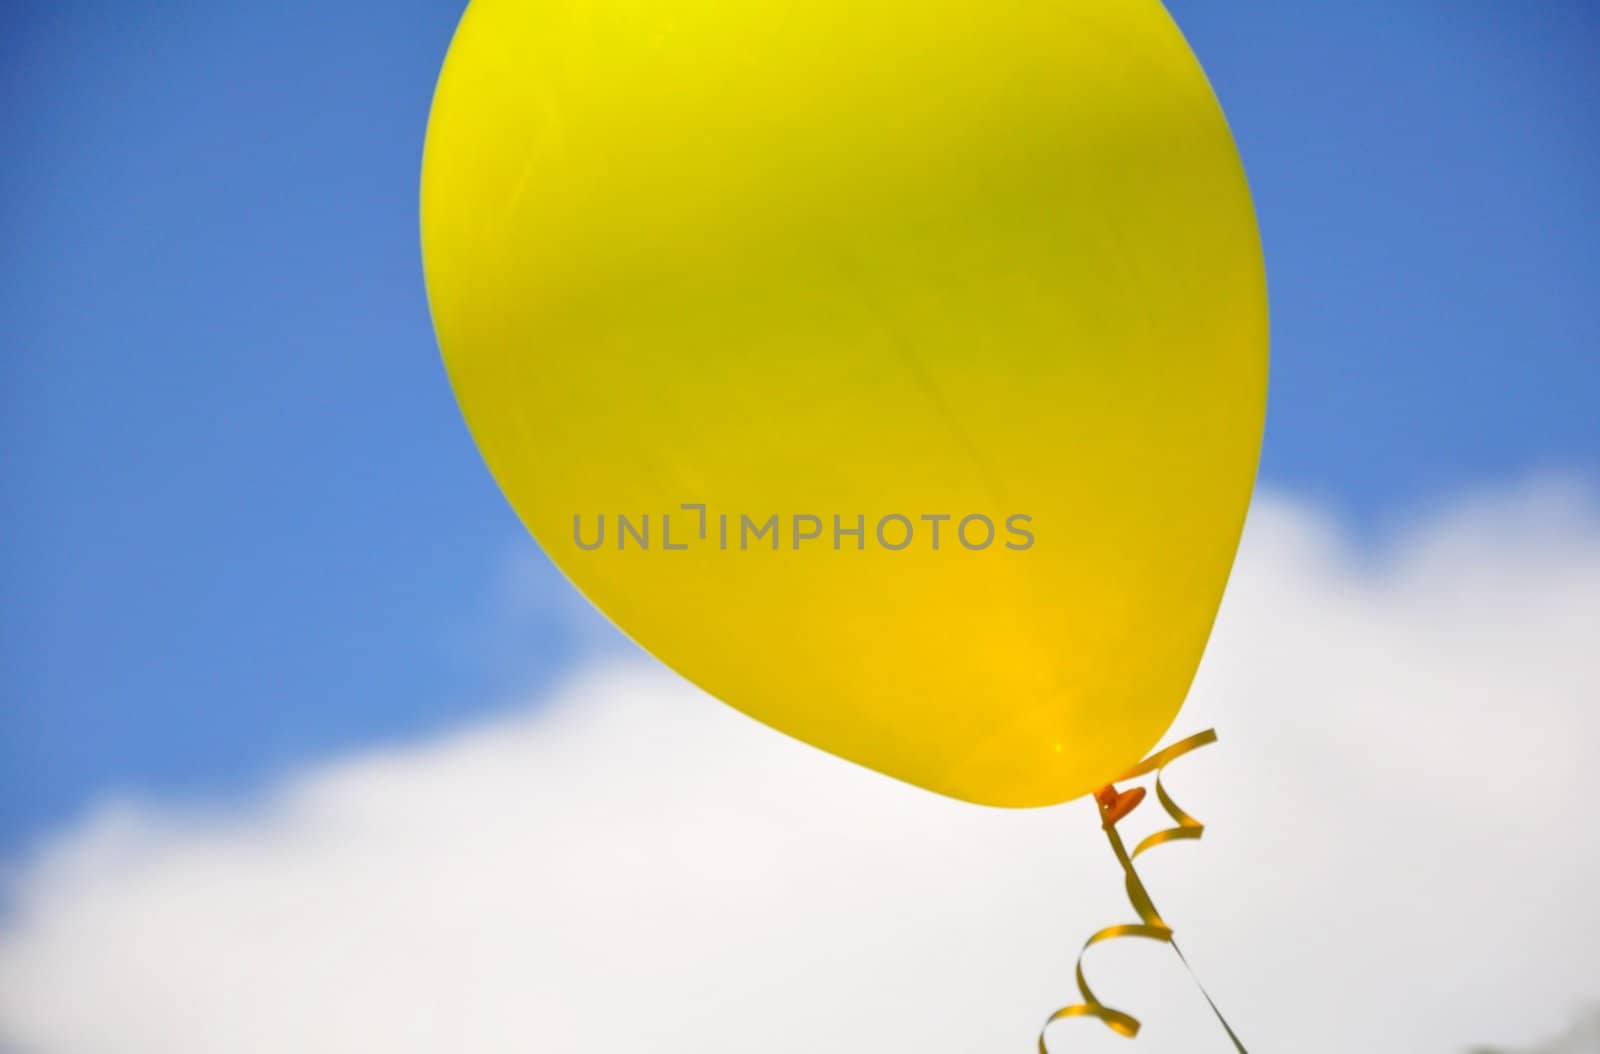 A single yellow balloon floats up and away.